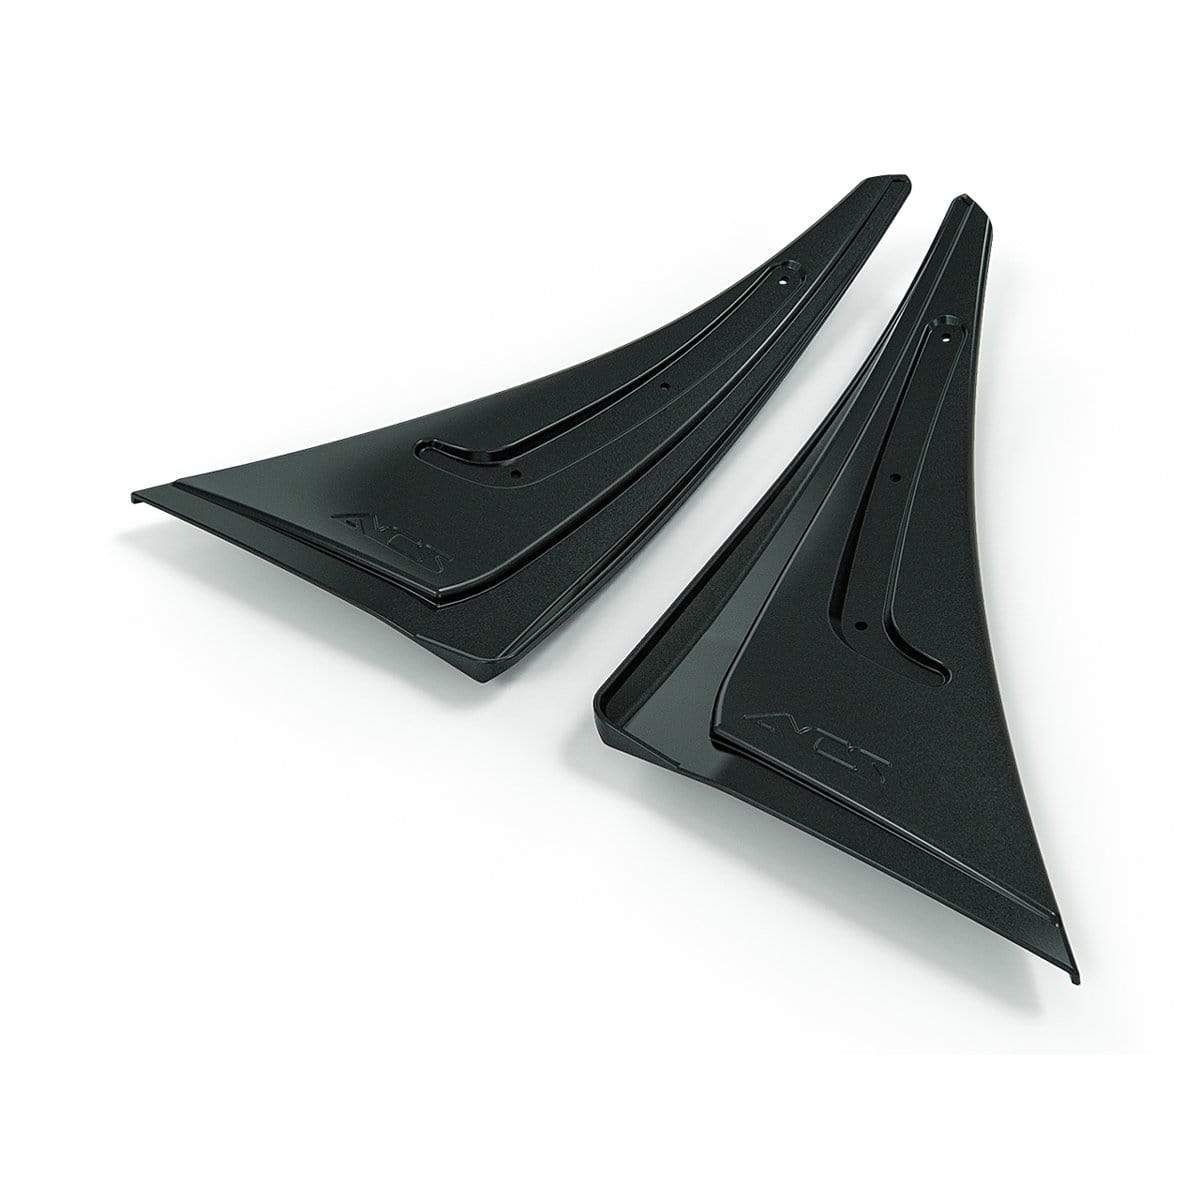 ACS Composite ZL1 Rock Chip Guards in Gloss Black, SKU [48-4-105]GBA, protect your Camaro from road debris and paint chipping.